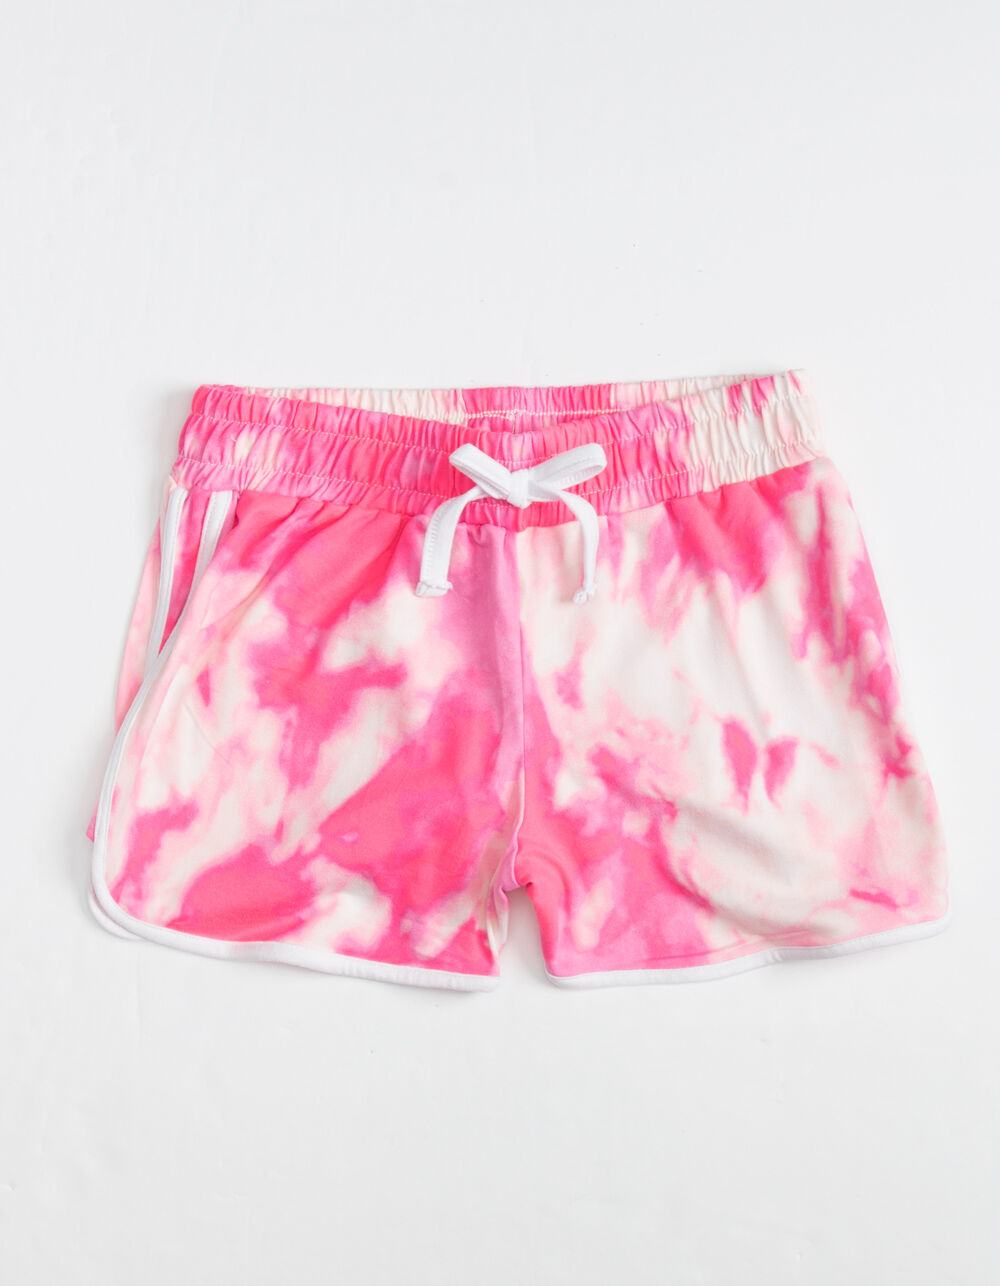 FULL CIRCLE TRENDS Tie Dye Contrast Piping Girls Shorts - PINK COMBO ...